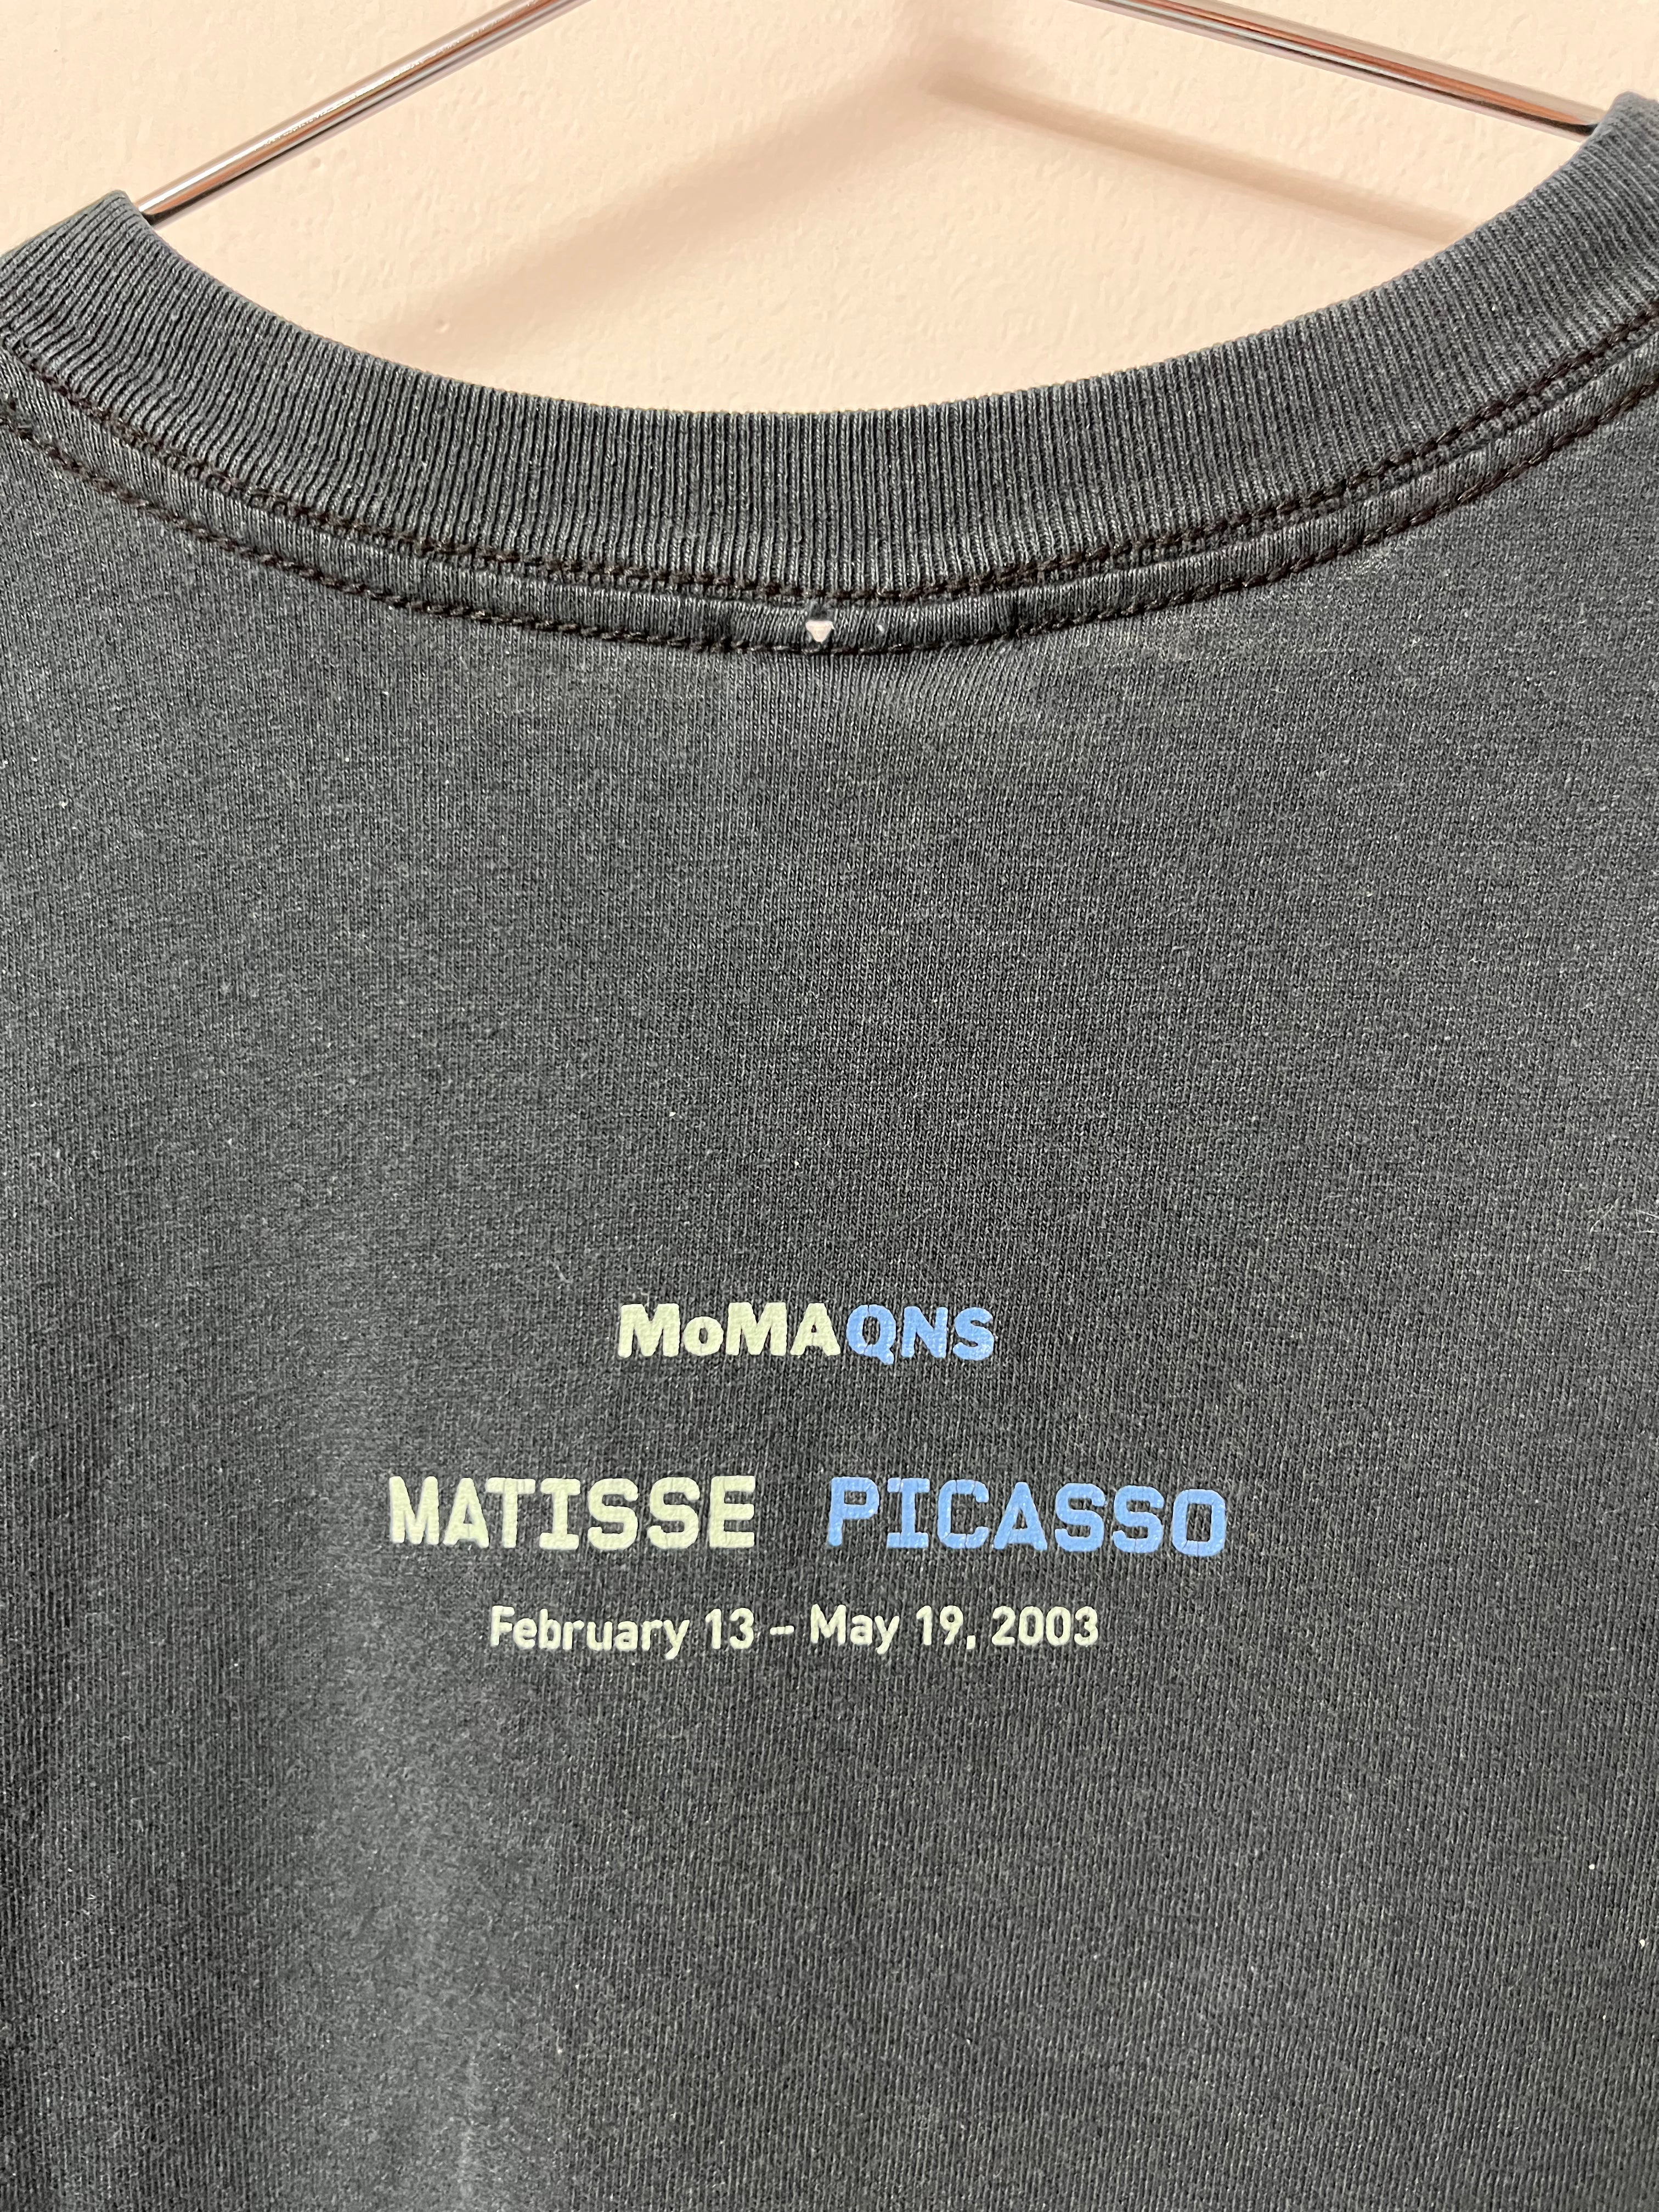 2003 Matisse Picasso MOMA Art T-Shirt - Faded Black - S